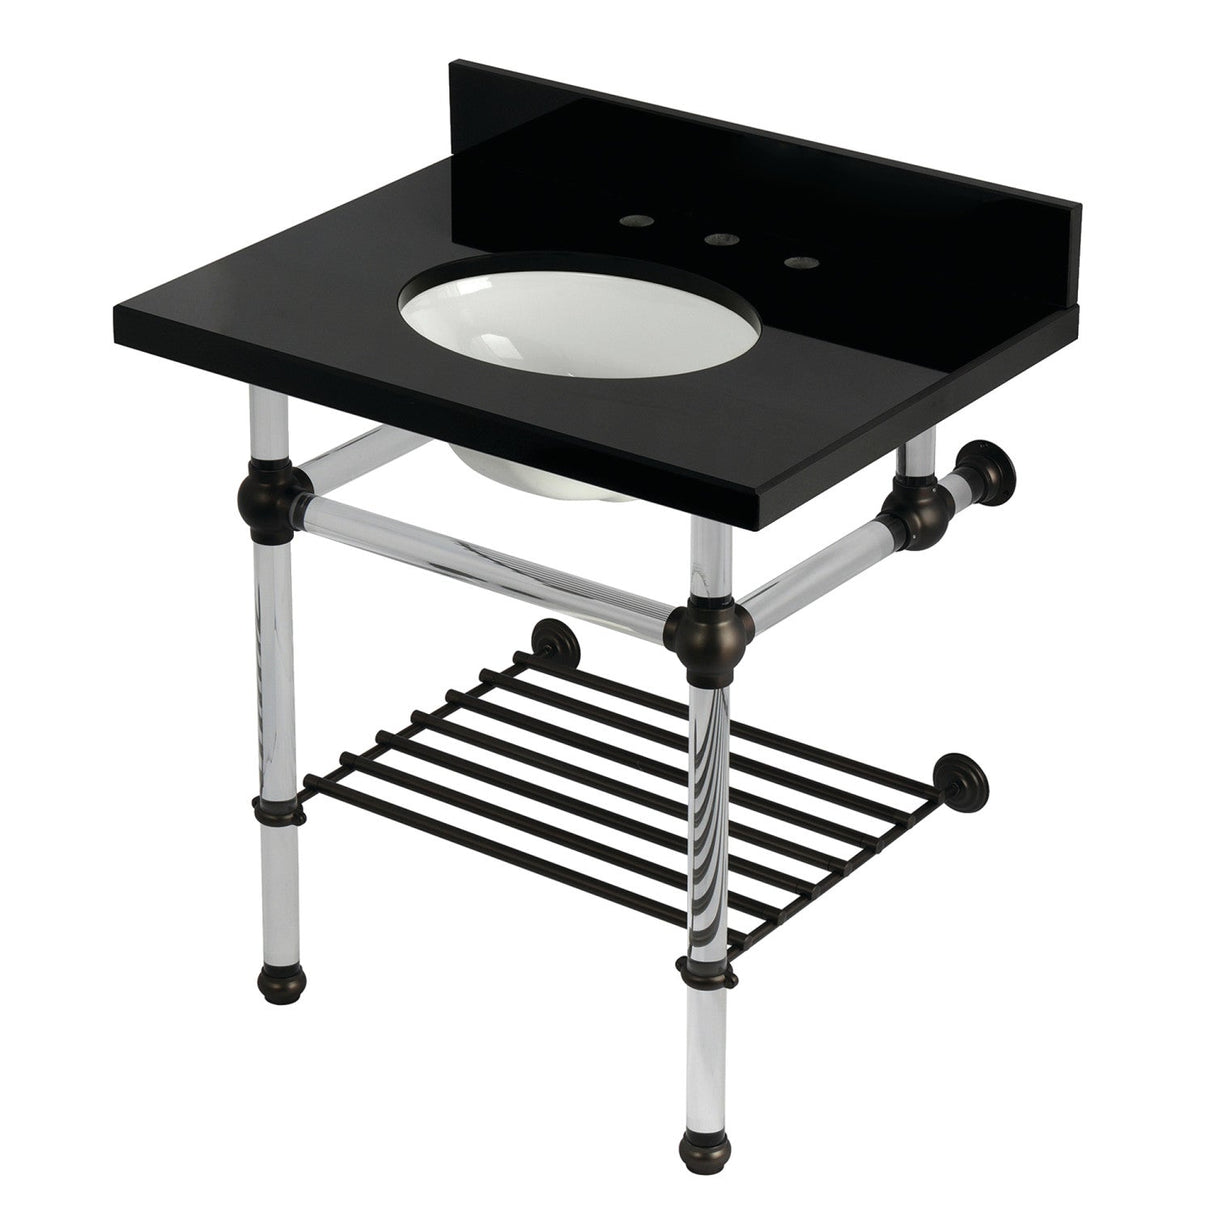 Templeton KVPK3030KAB5 30-Inch Console Sink with Acrylic Legs (8-Inch, 3 Hole), Black Granite/Oil Rubbed Bronze